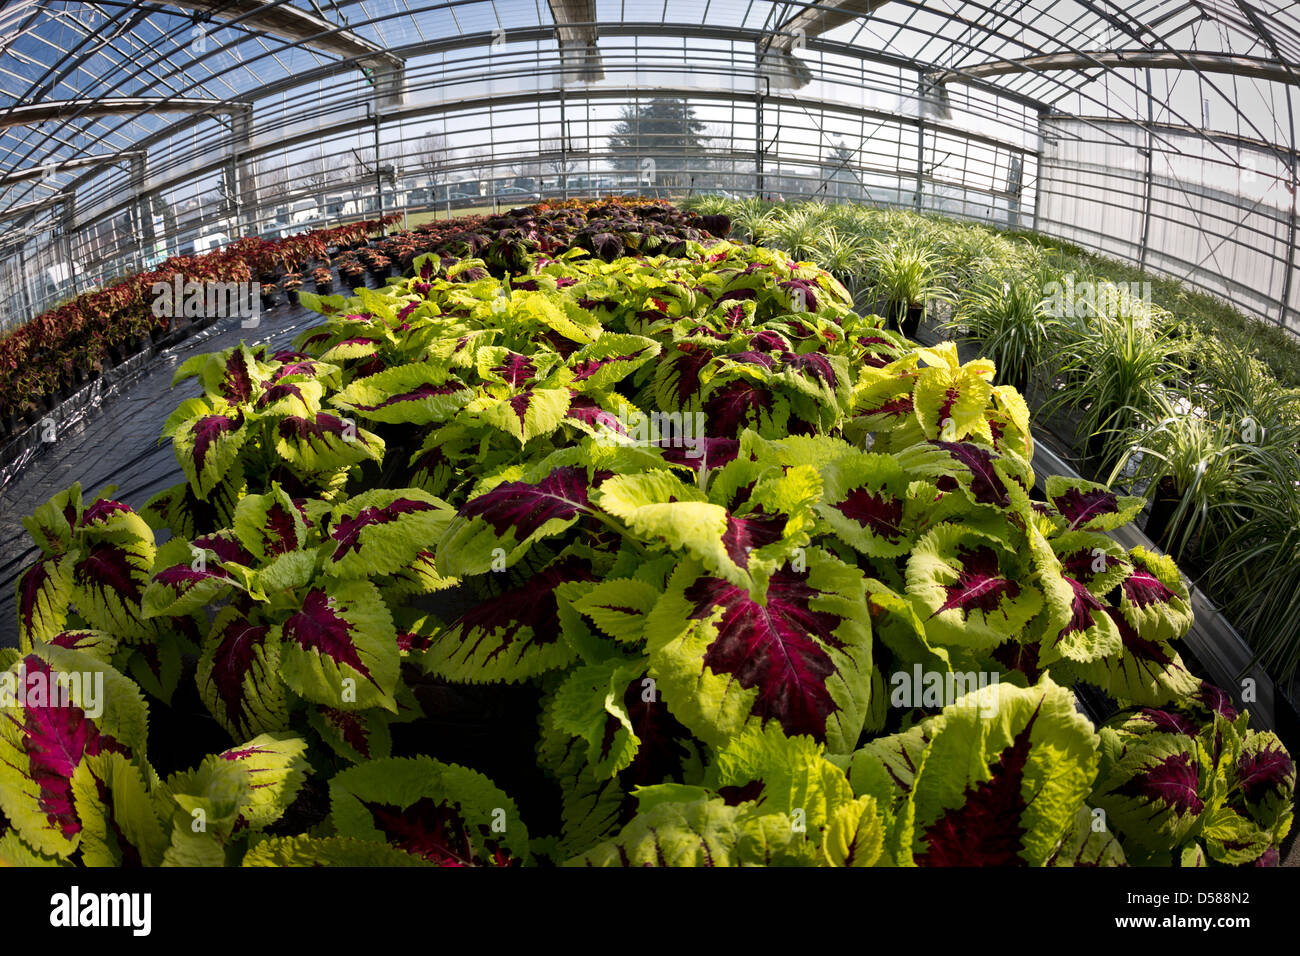 A variegated Coleus plant cultivation (Solenostemon scutellarioides), in the Vichy horticultural production Centre (France). Stock Photo